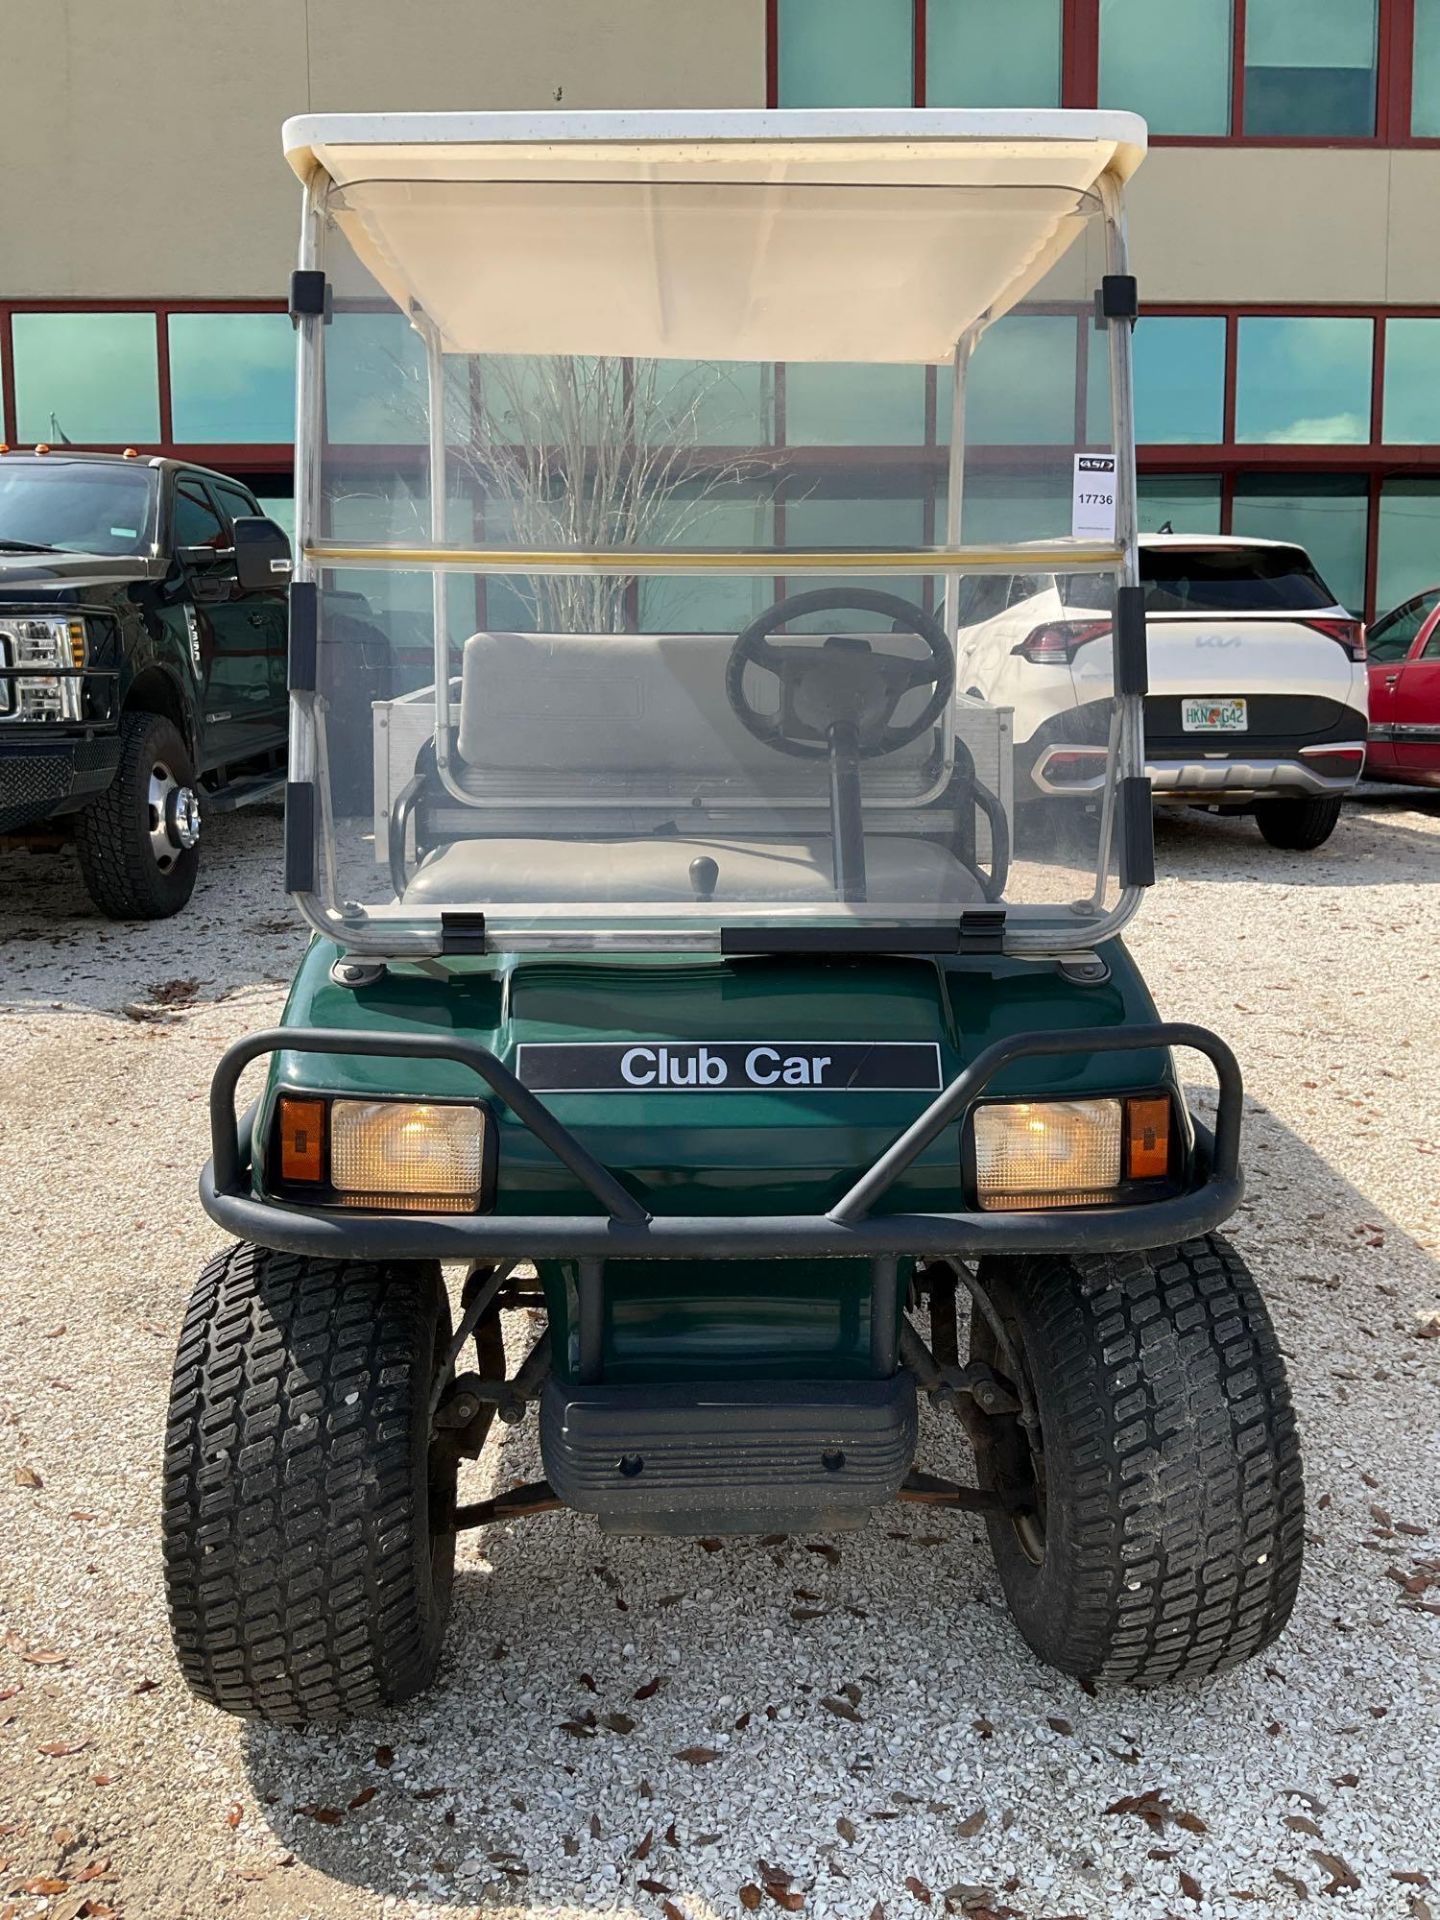 CLUB CAR CARRYALL 252 , GAS POWERED, MANUAL DUMP BED, HITCH , BILL OF SALE ONLY, RUNS & DRIVES - Image 12 of 13